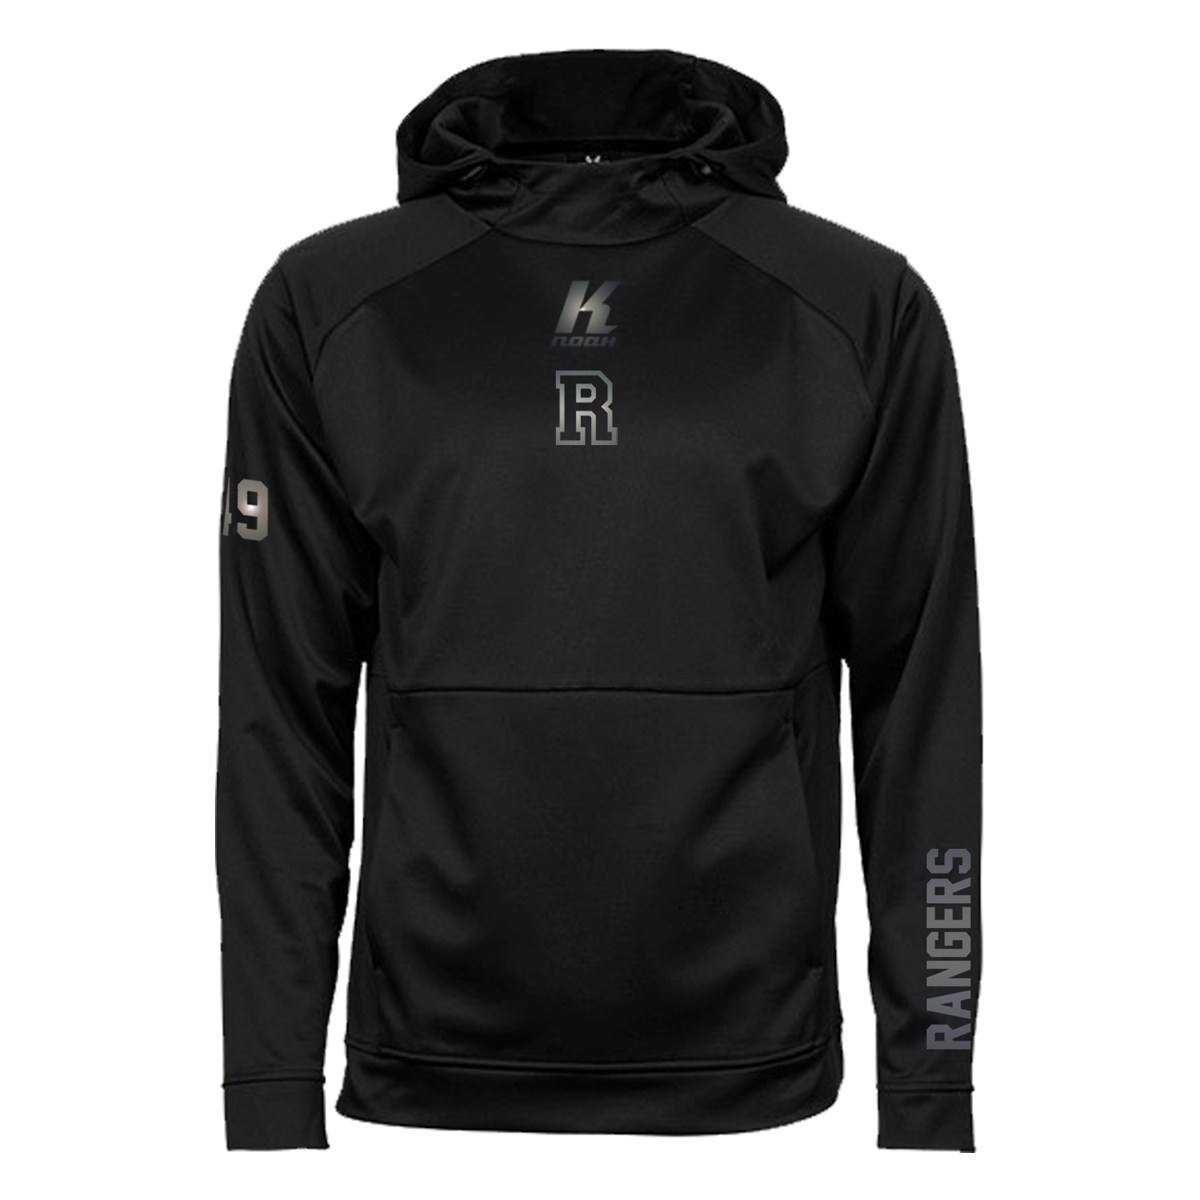 Rangers "Blackline" Performance Hoodie JH006 with Playernumber or Initials